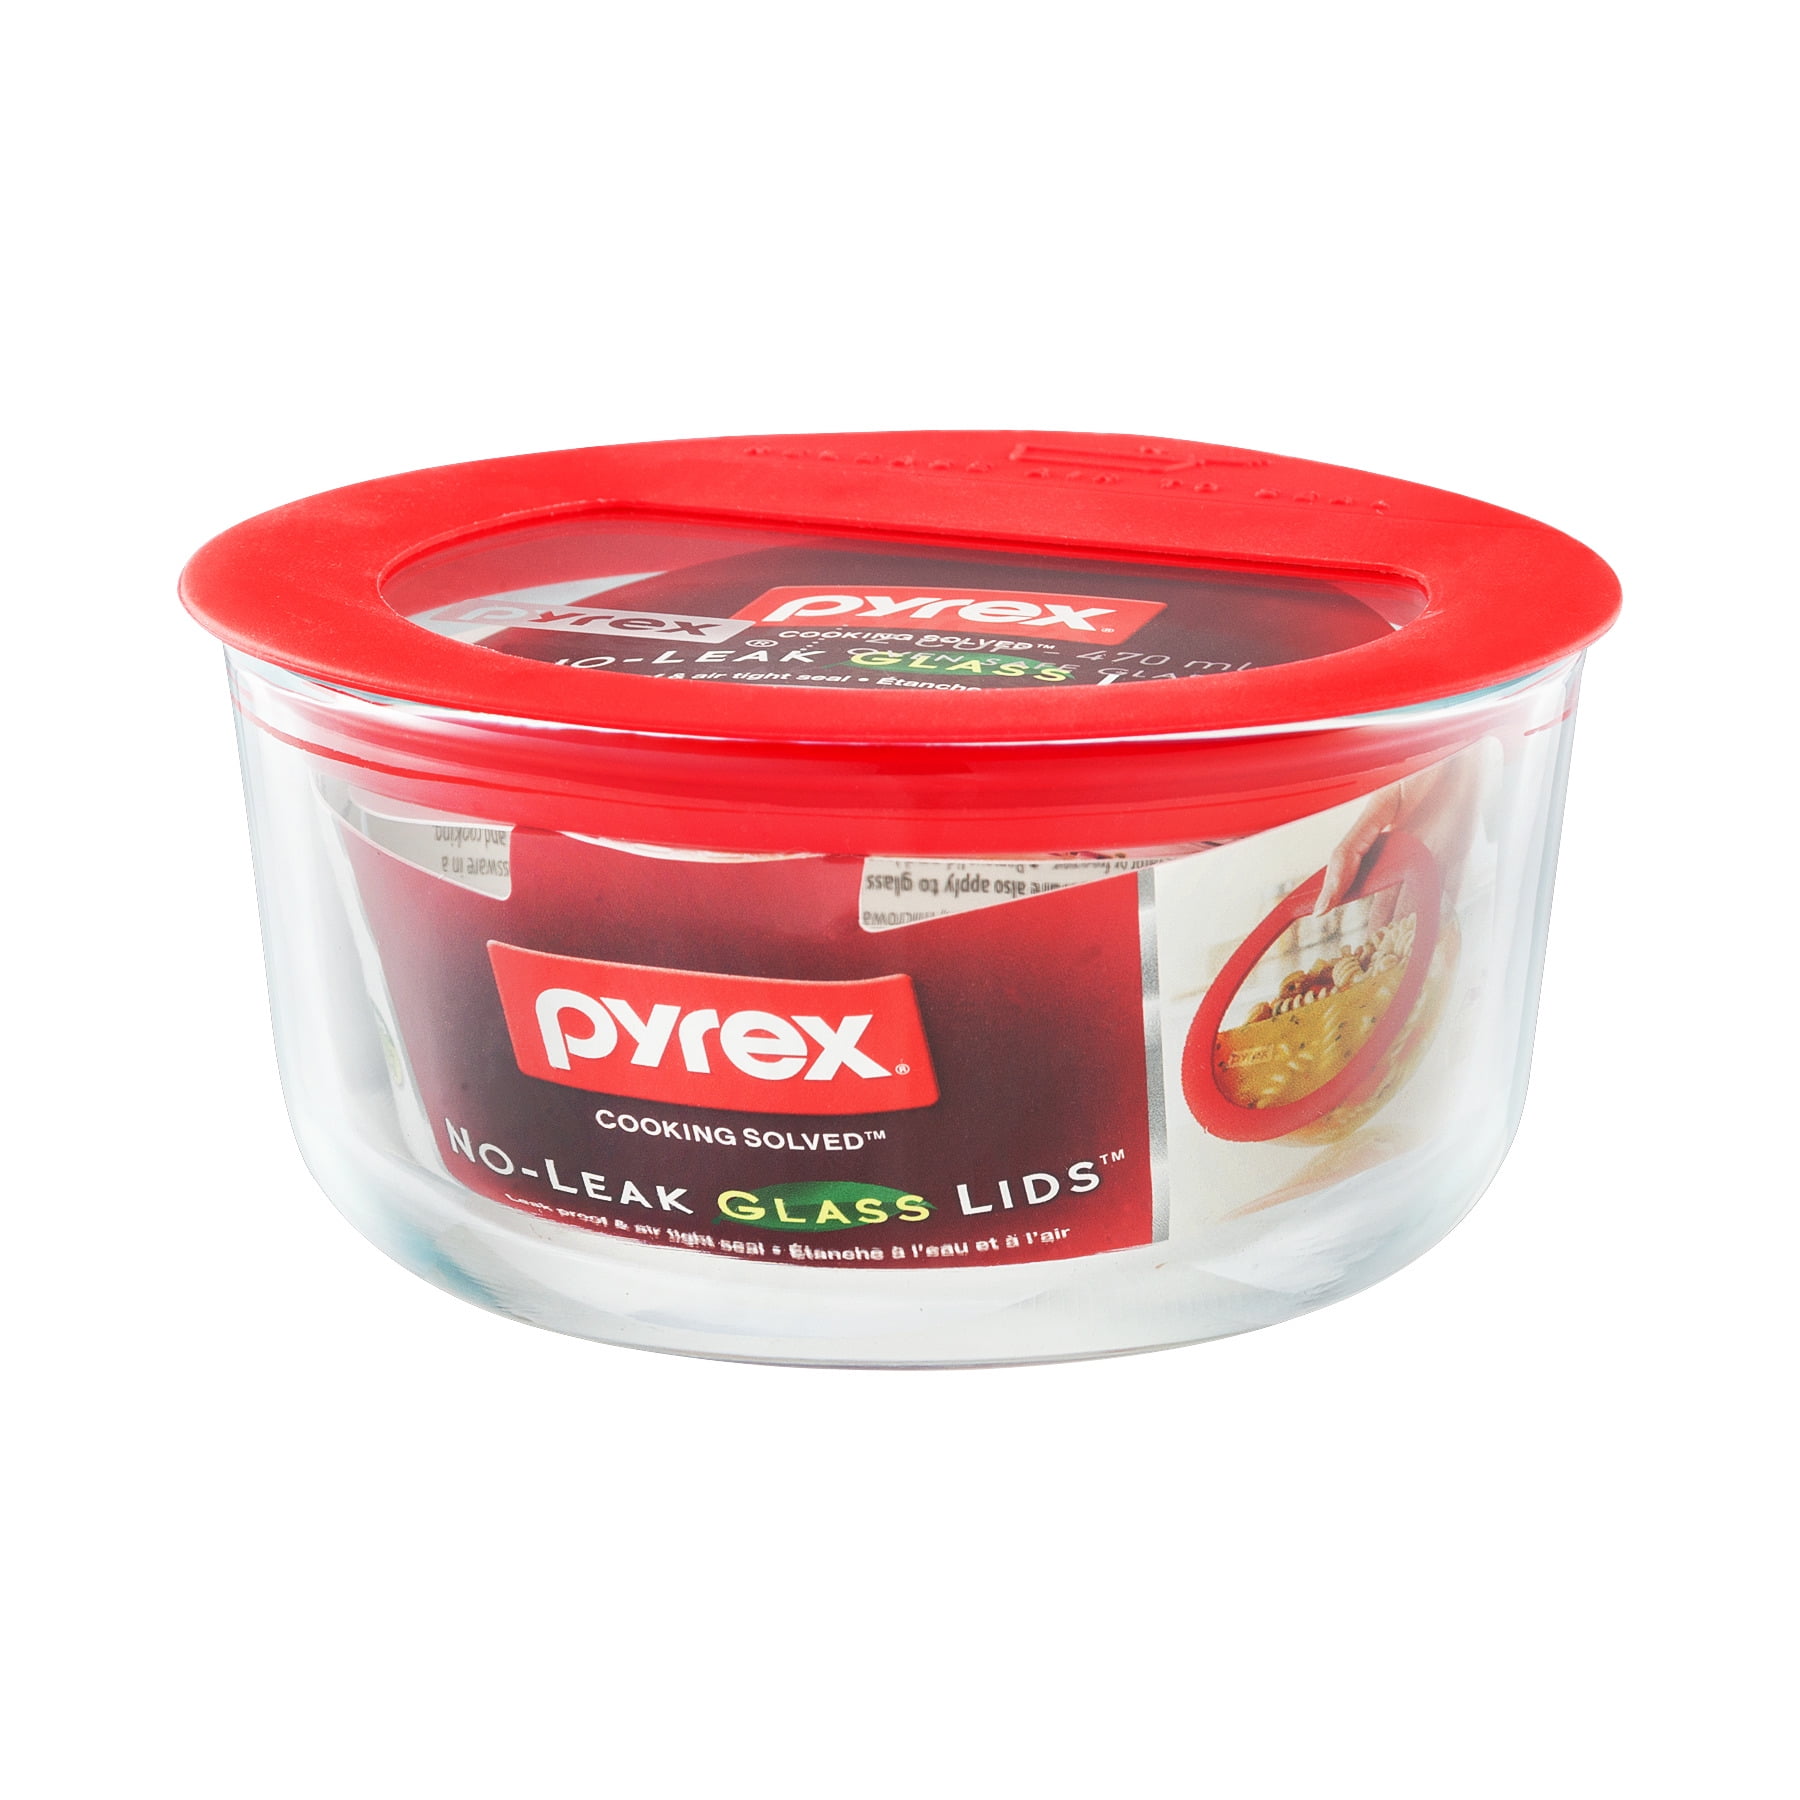 4pk Pyrex 2 Cup Glass Food Storage Containers with Airtight Lids